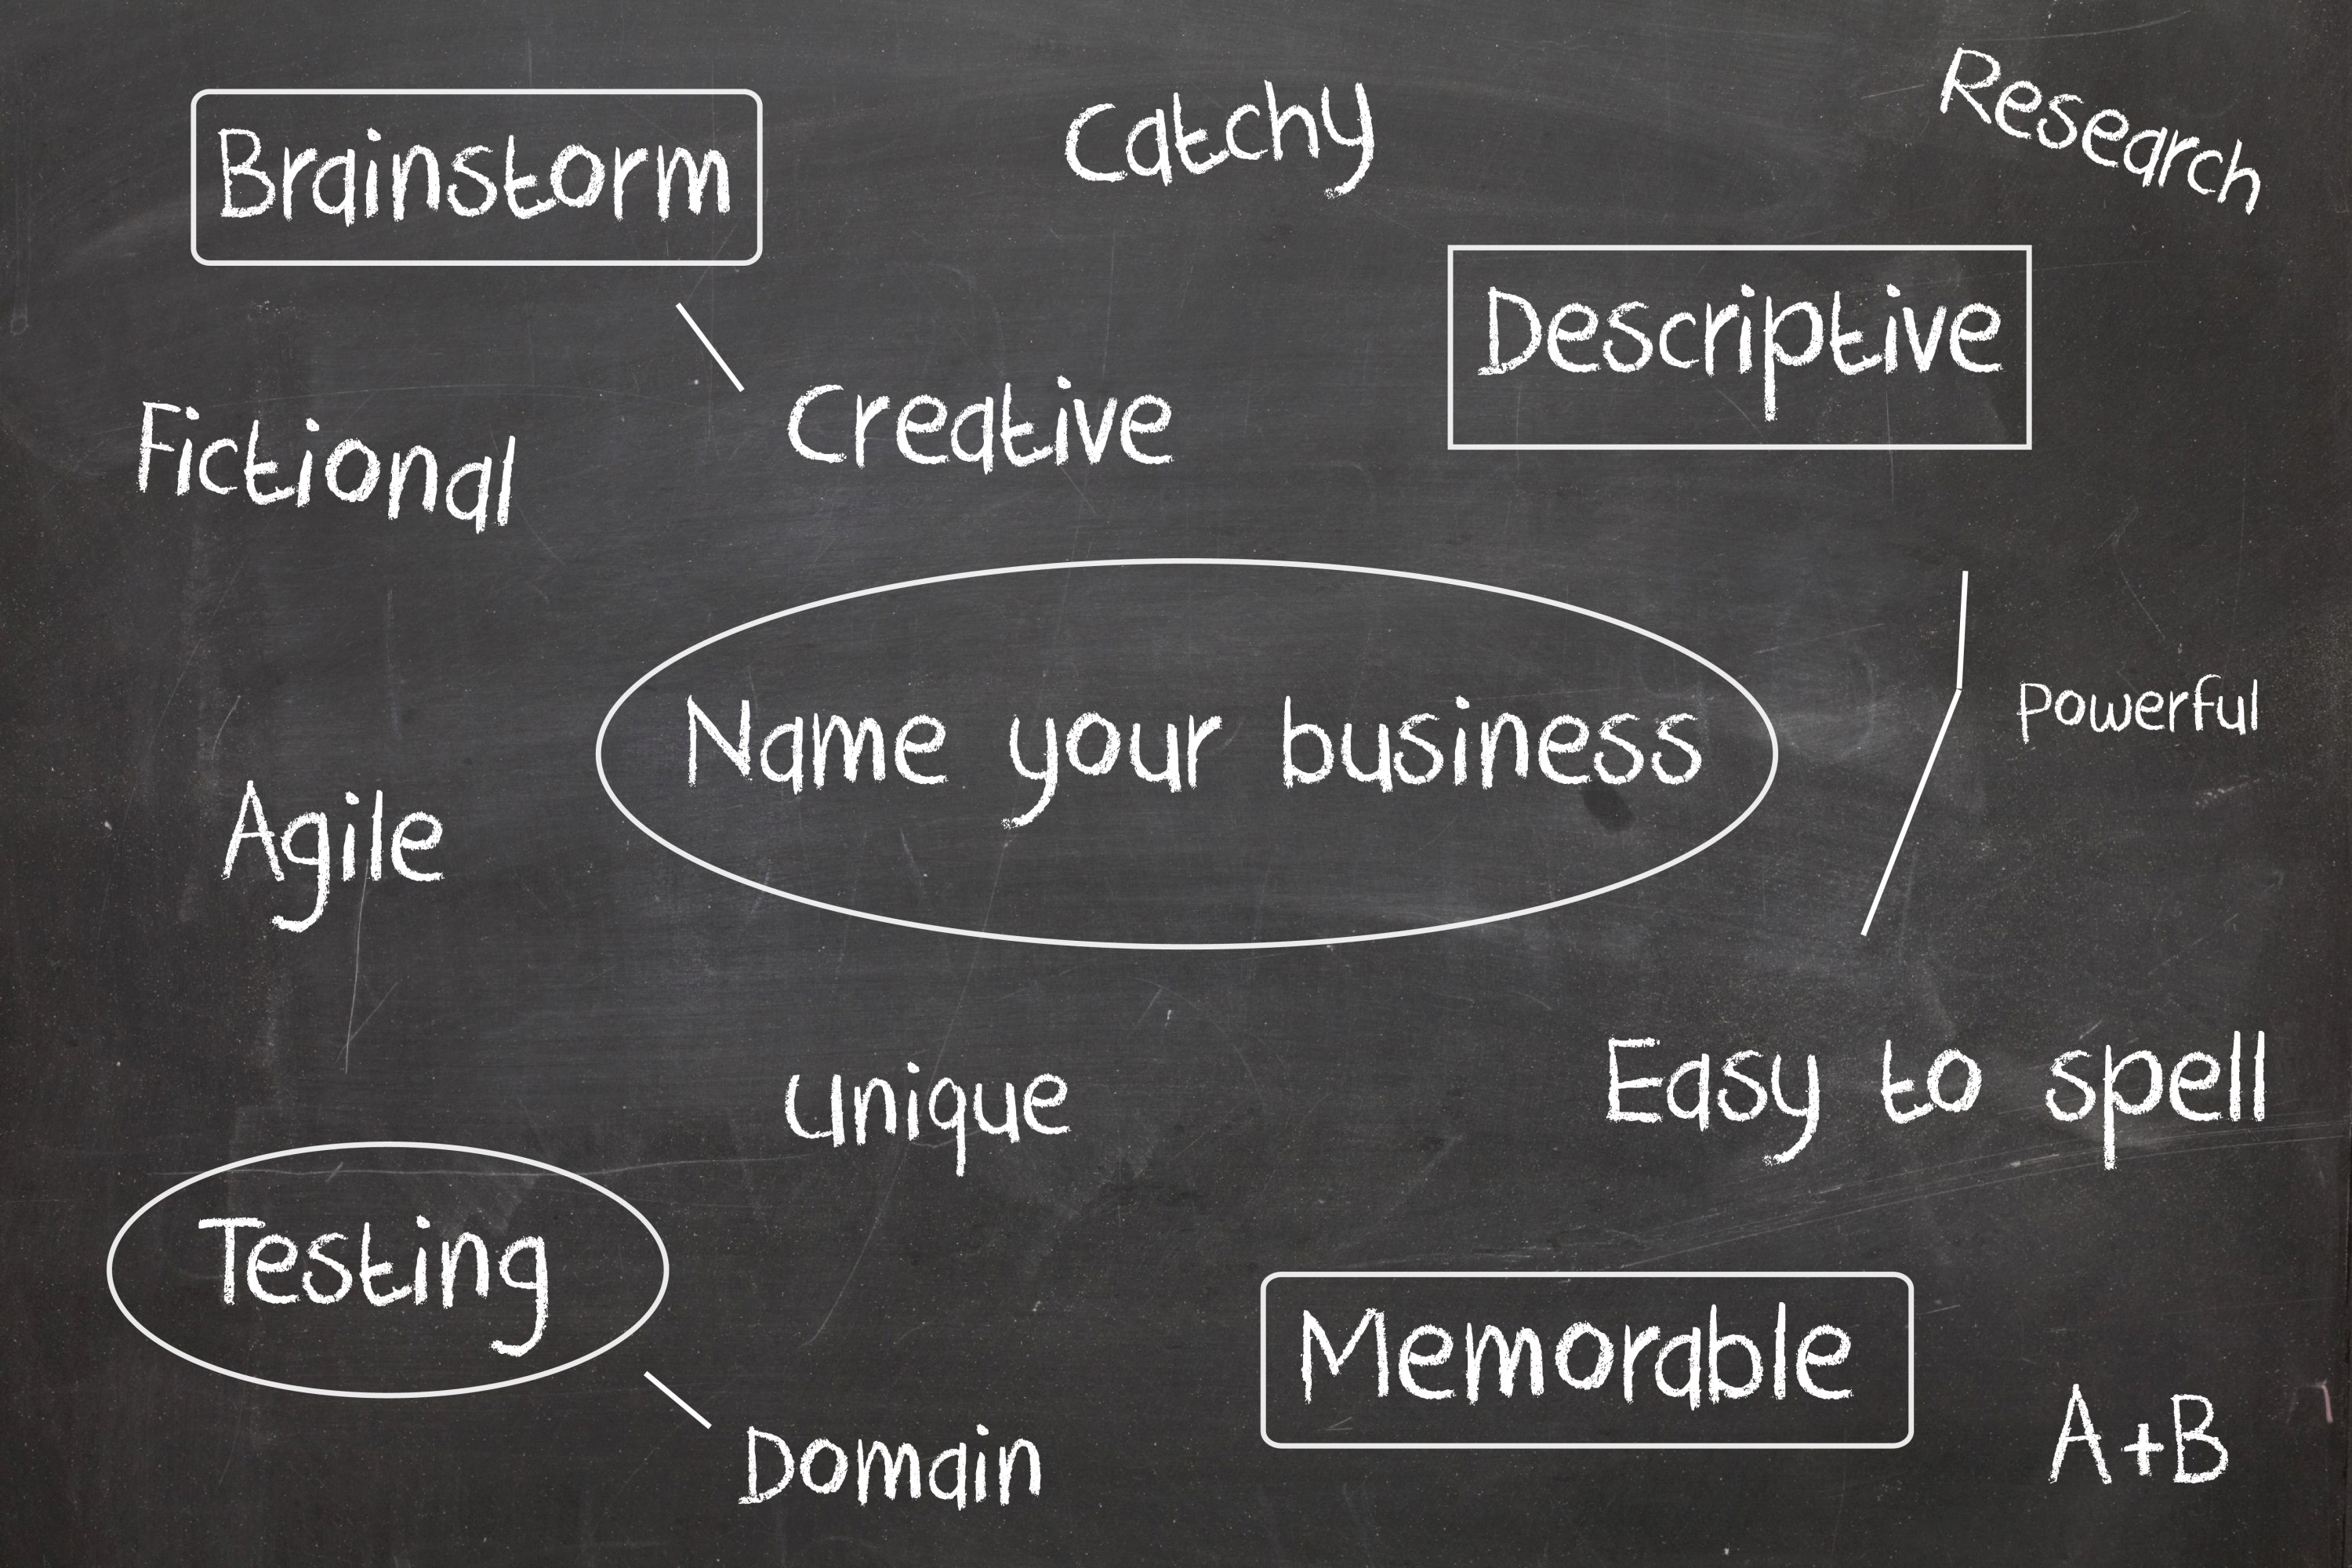 Deciding On Your Business Name And Logo | JTB Consulting